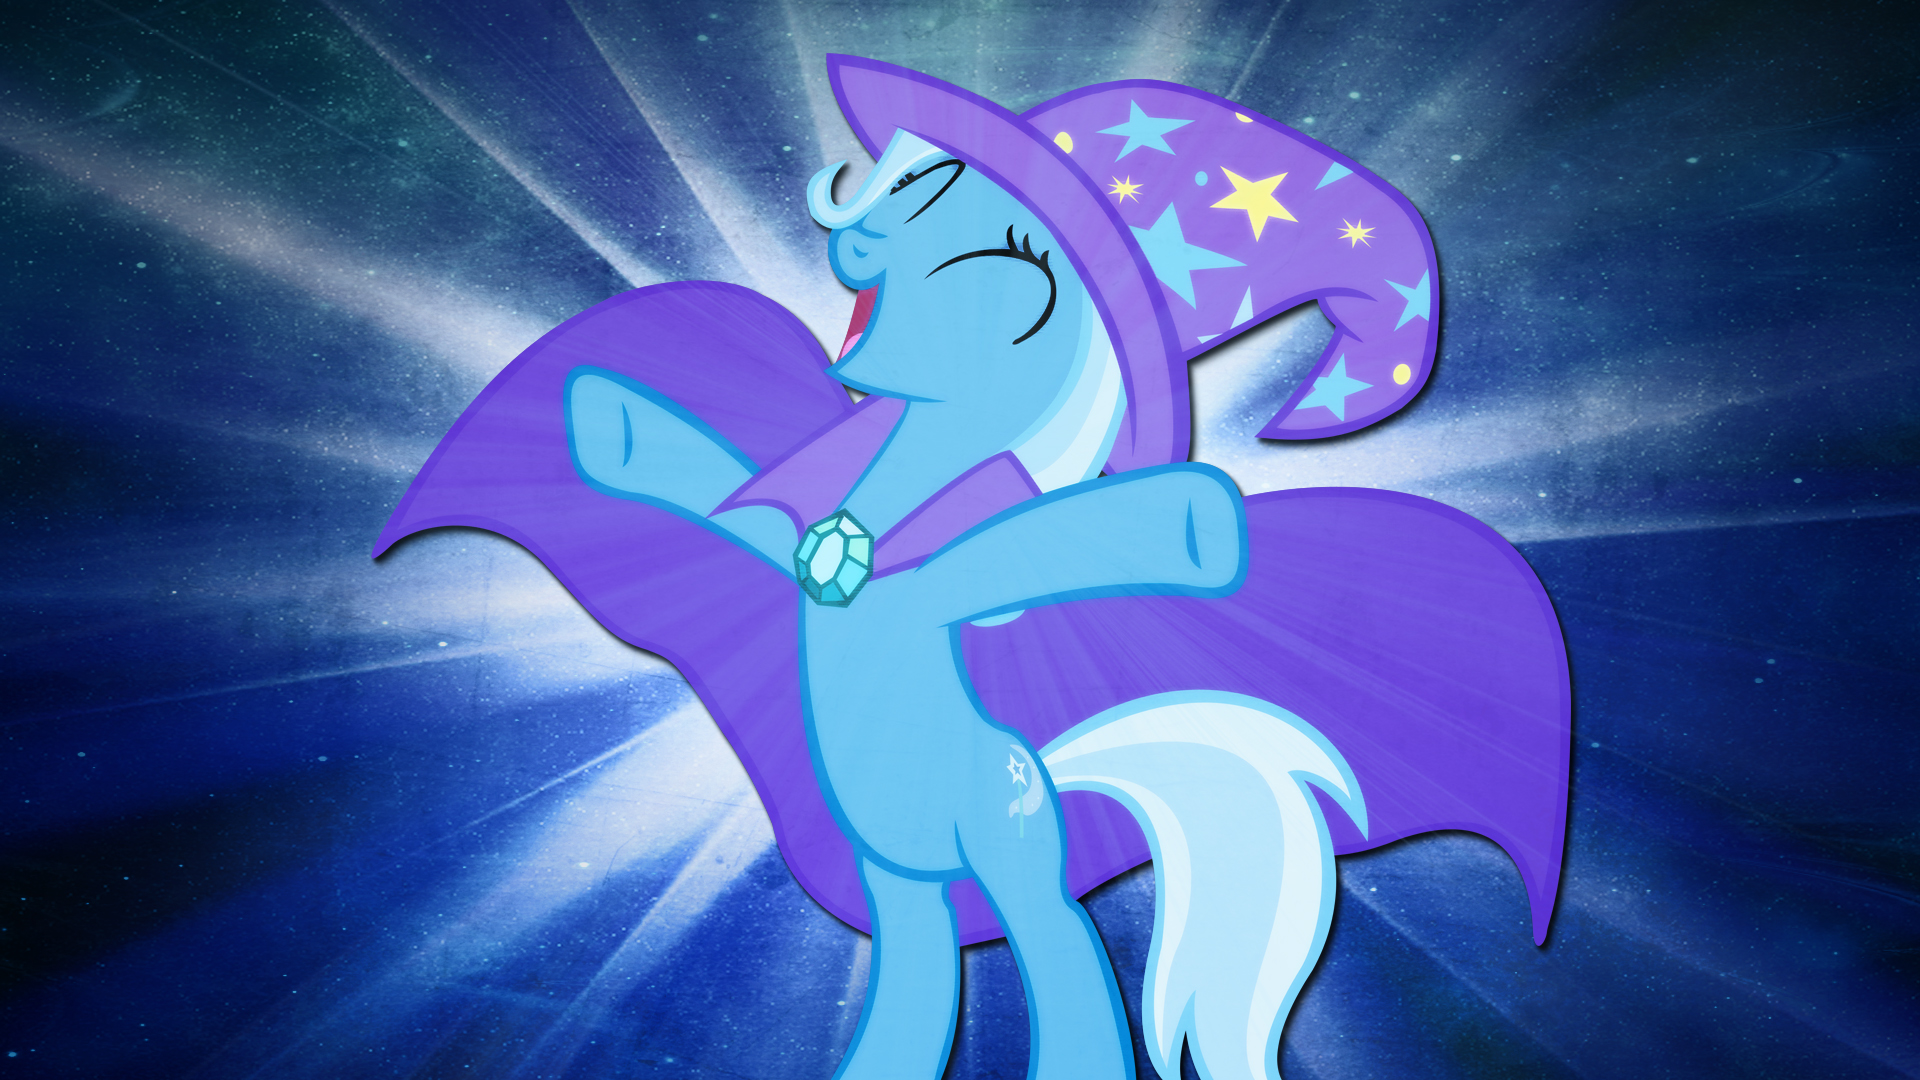 Trixie Wallpaper by Shelmo69 and TygerxL